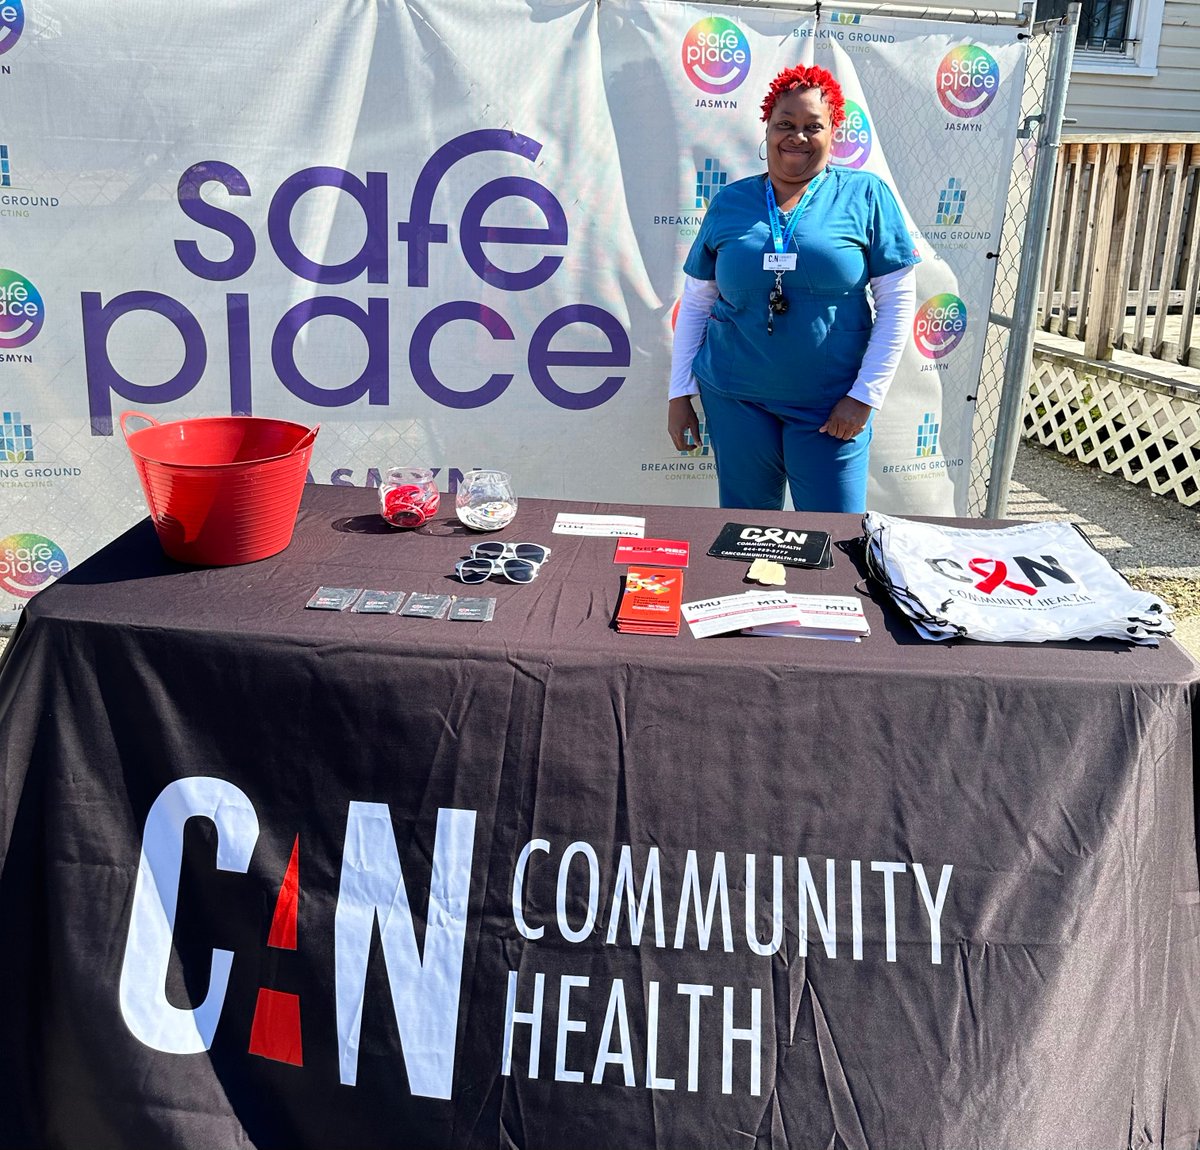 JACKSONVILLE, FL: Find our #CANjacksonville team at @JASMYNjax this Tue, March 19th! From 12pm-4pm, we will do free #HIV, #HepC and #STI screenings at 923 Peninsular Pl in #JacksonvilleFL plus linkage to #HIVcare, #RyanWhite and #PrEP services!